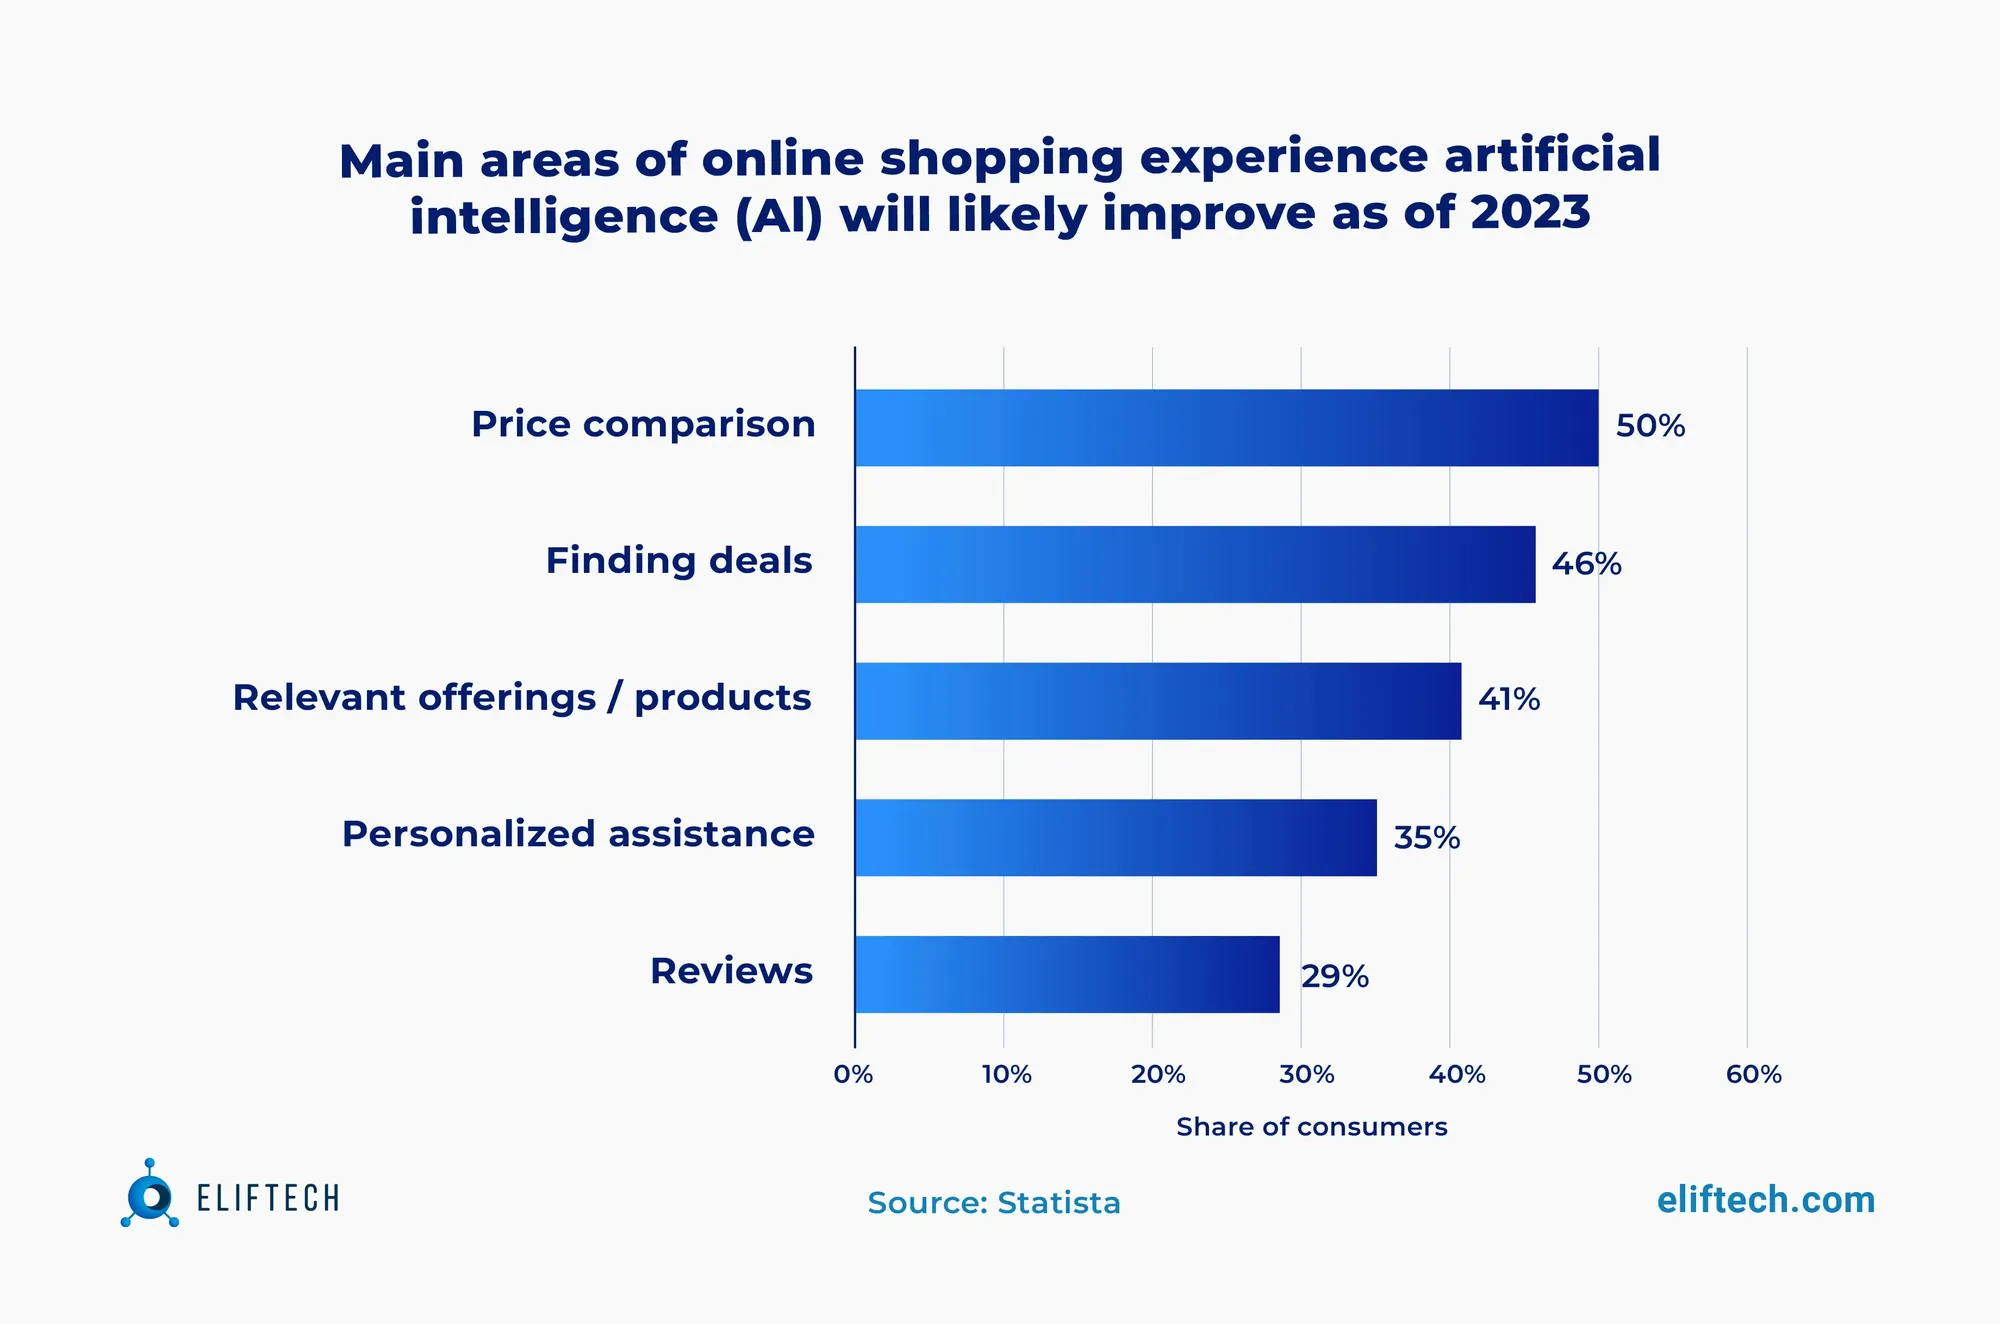 Key domains where artificial intelligence (AI) is expected to enhance the online shopping experience by 2023